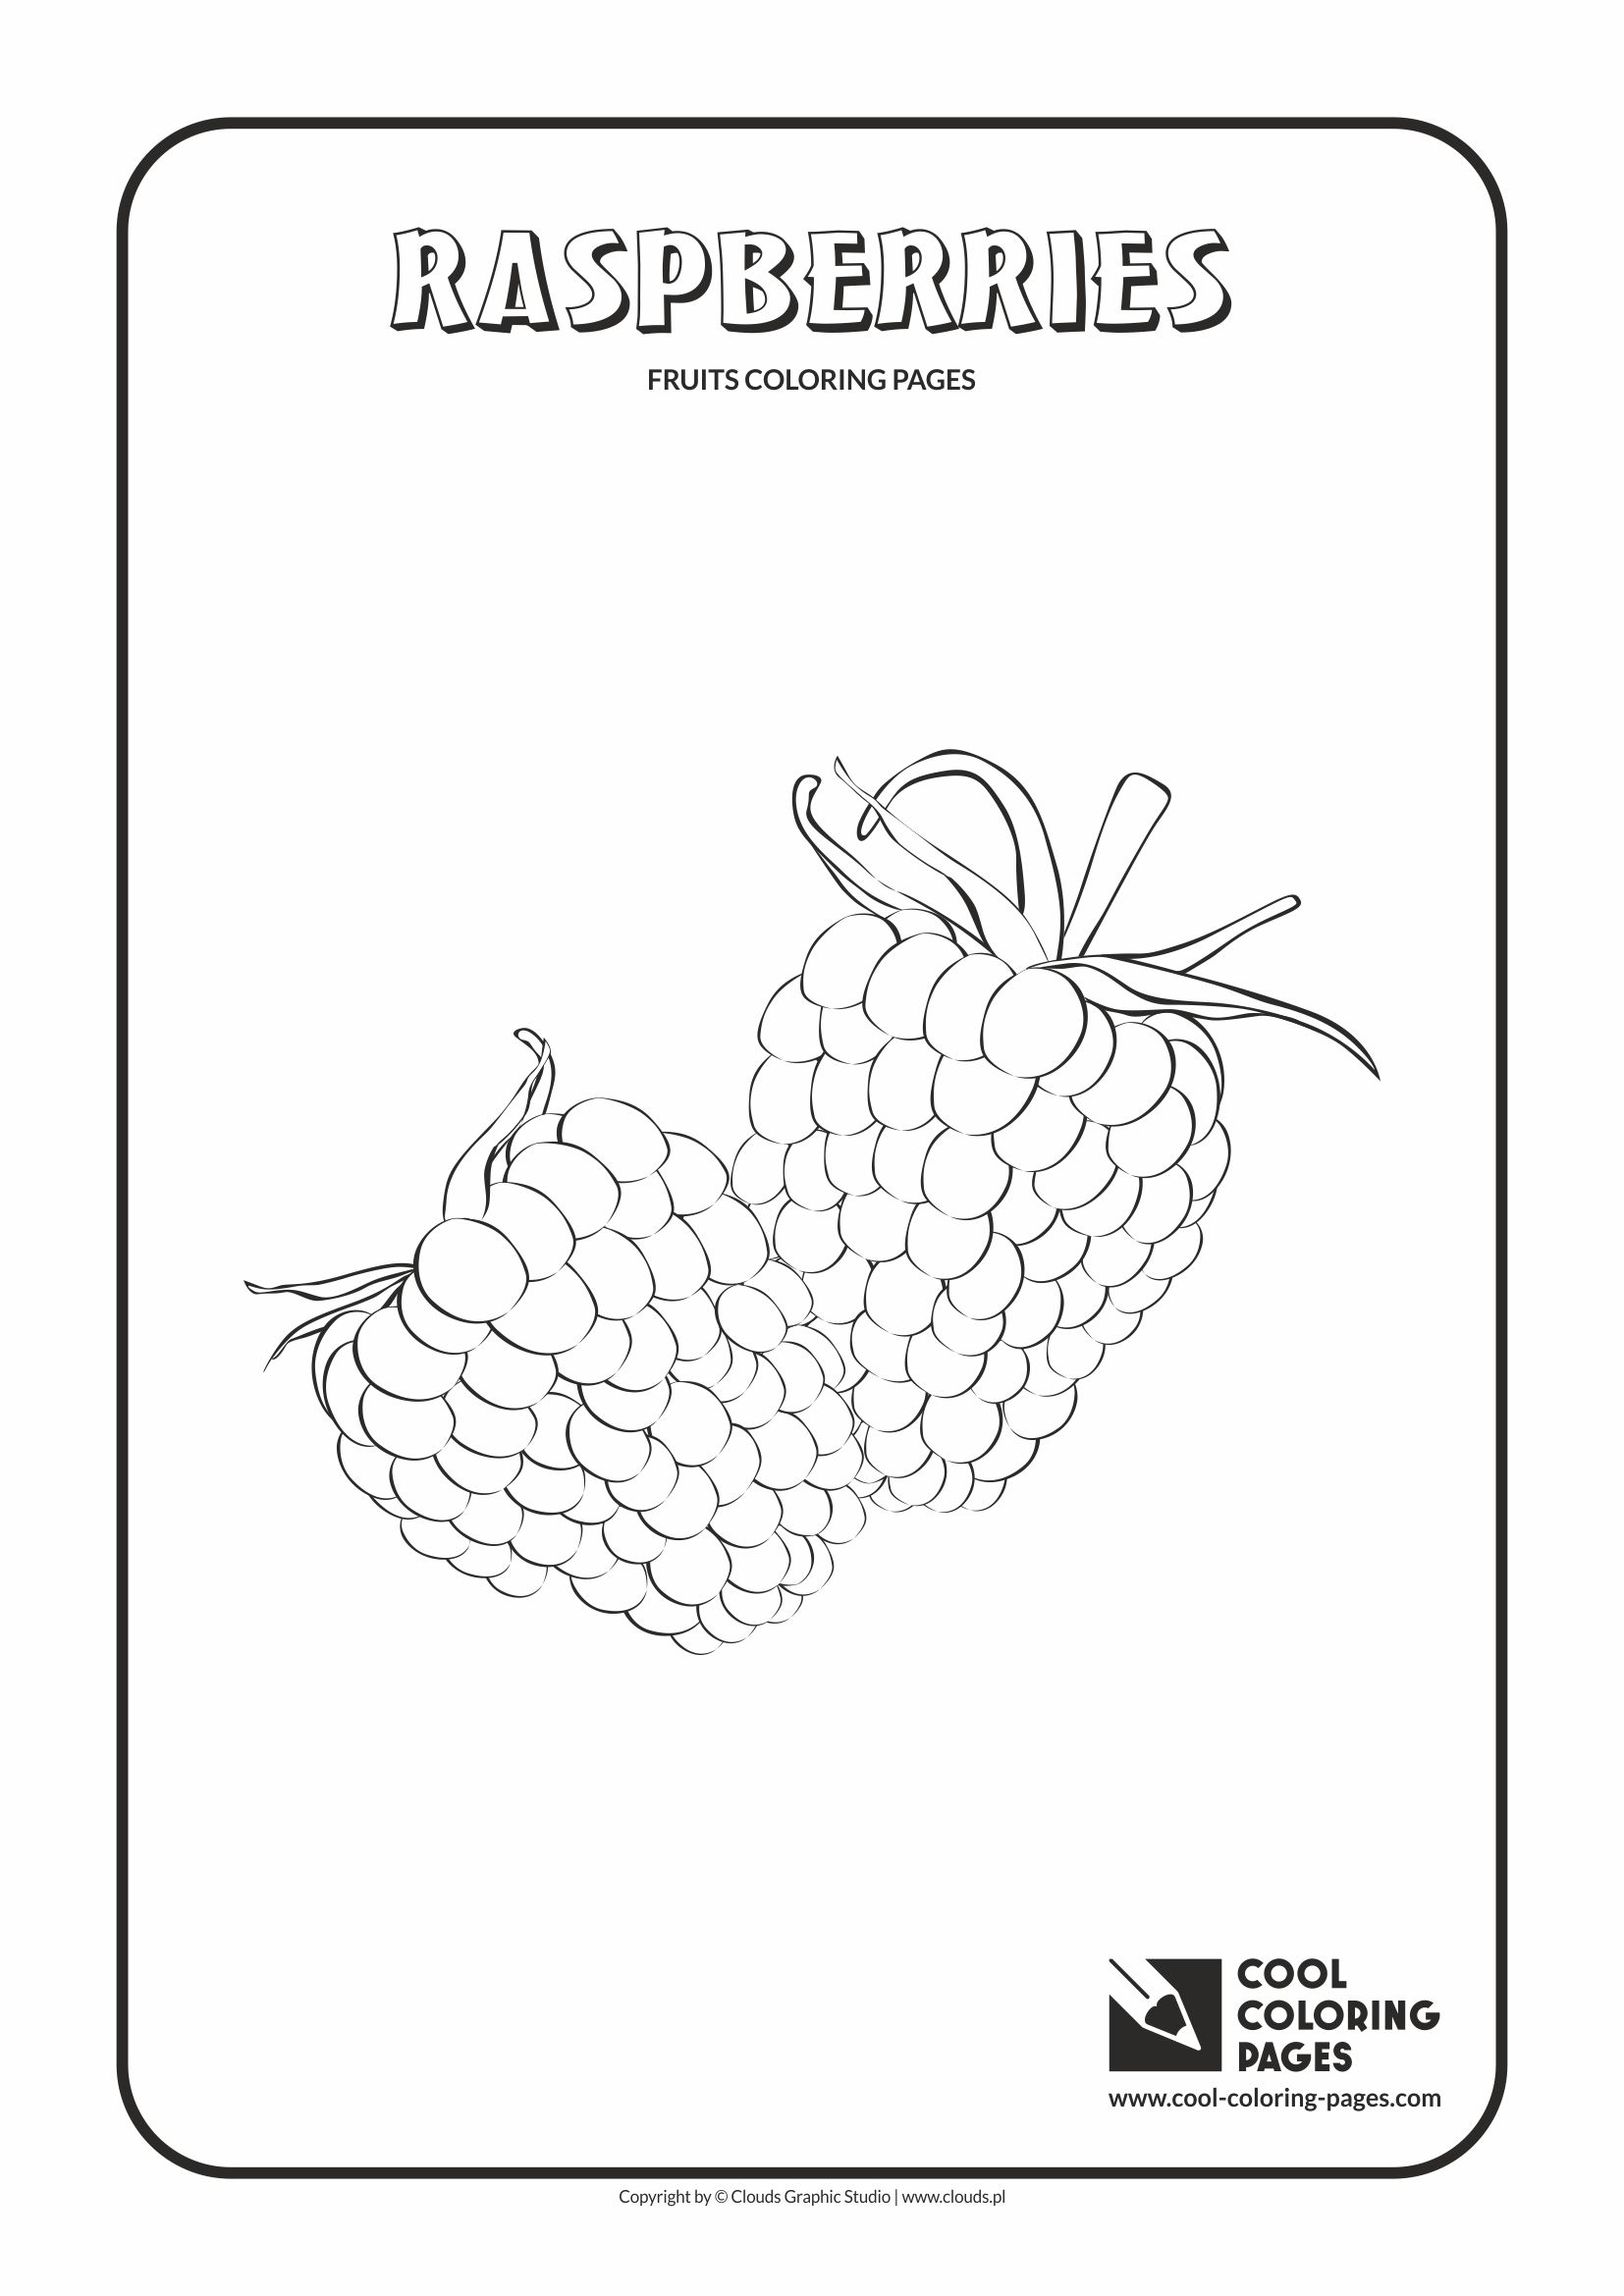 Cool Coloring Pages - Plants / Raspberries / Coloring page with raspberries